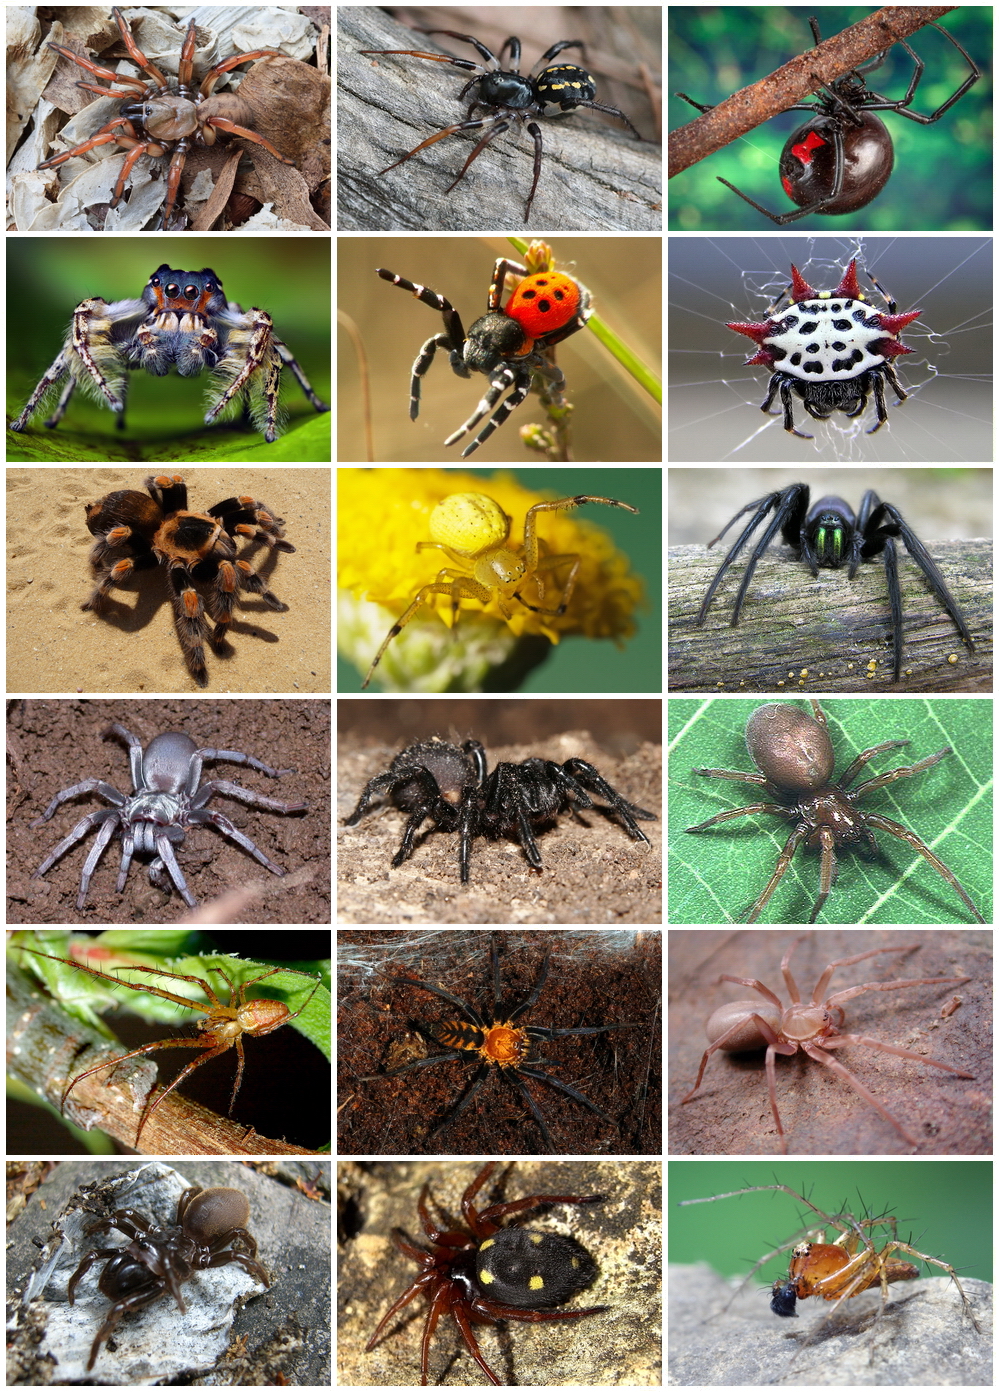 How many species of spiders are there?